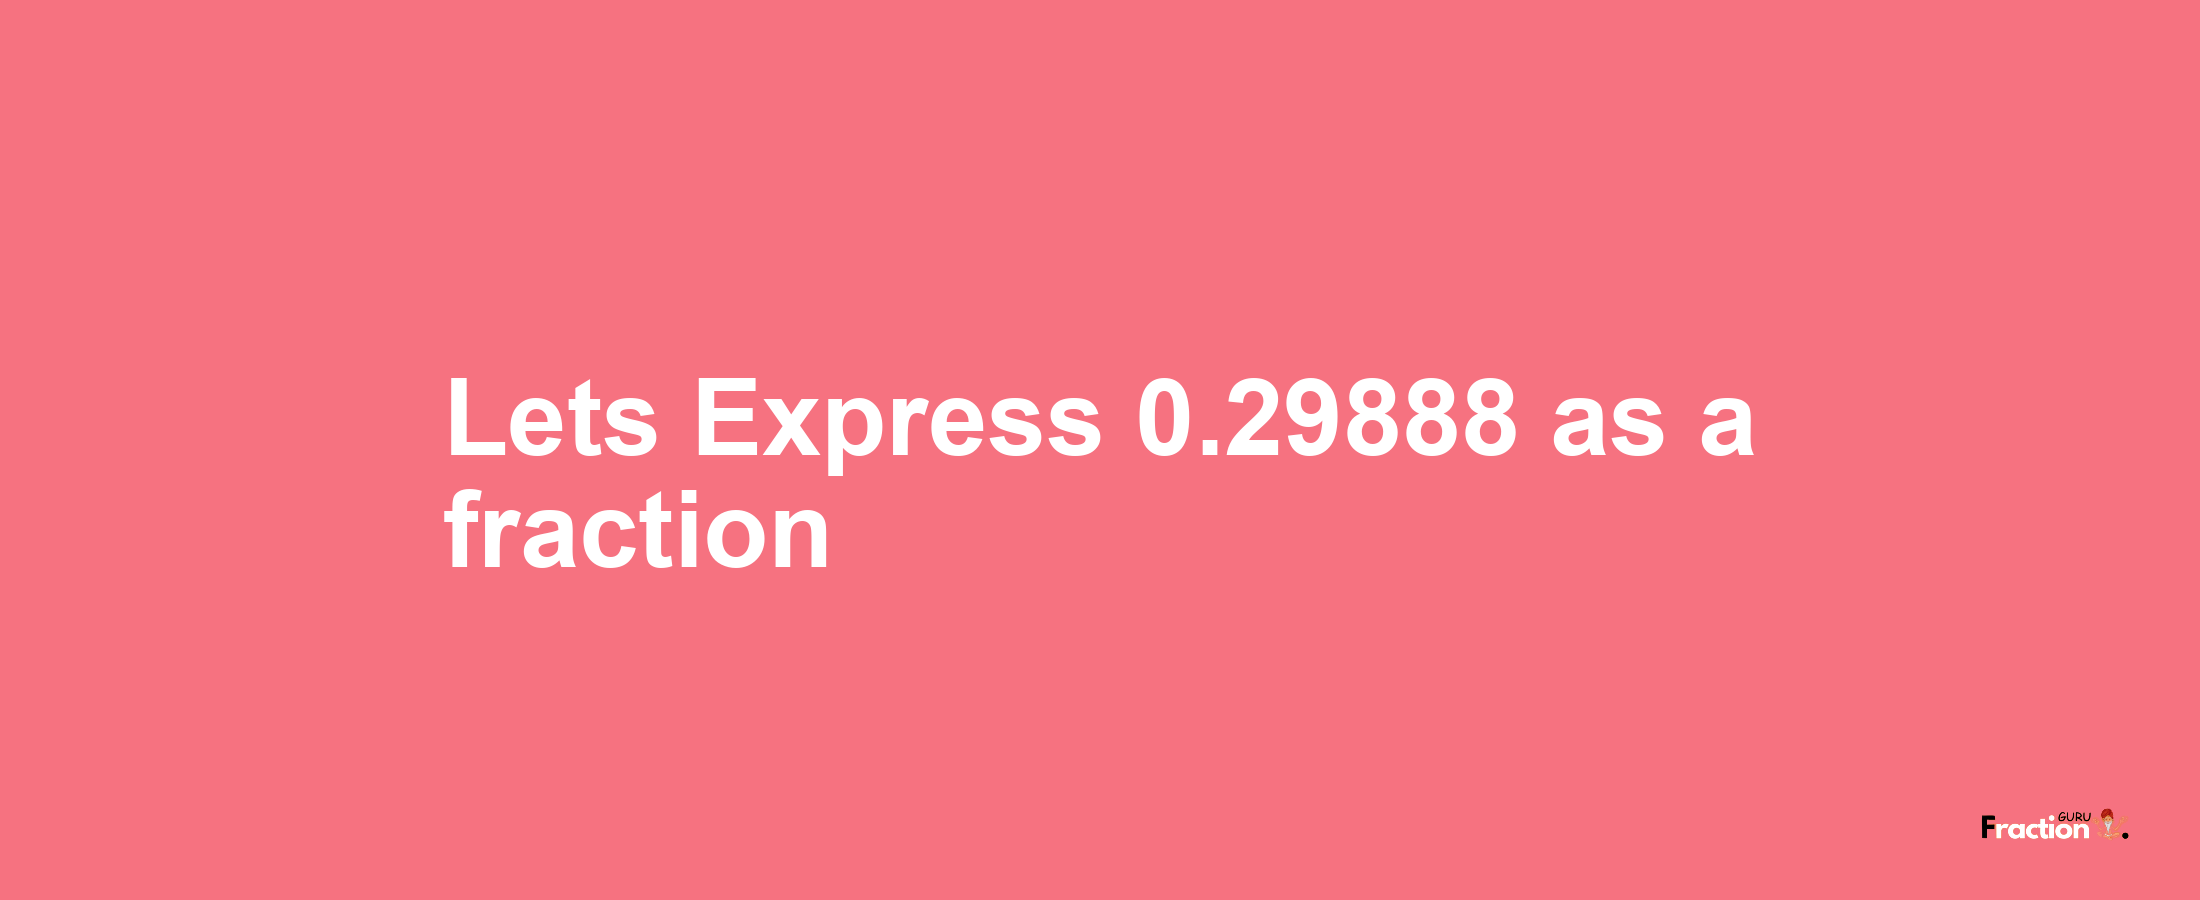 Lets Express 0.29888 as afraction